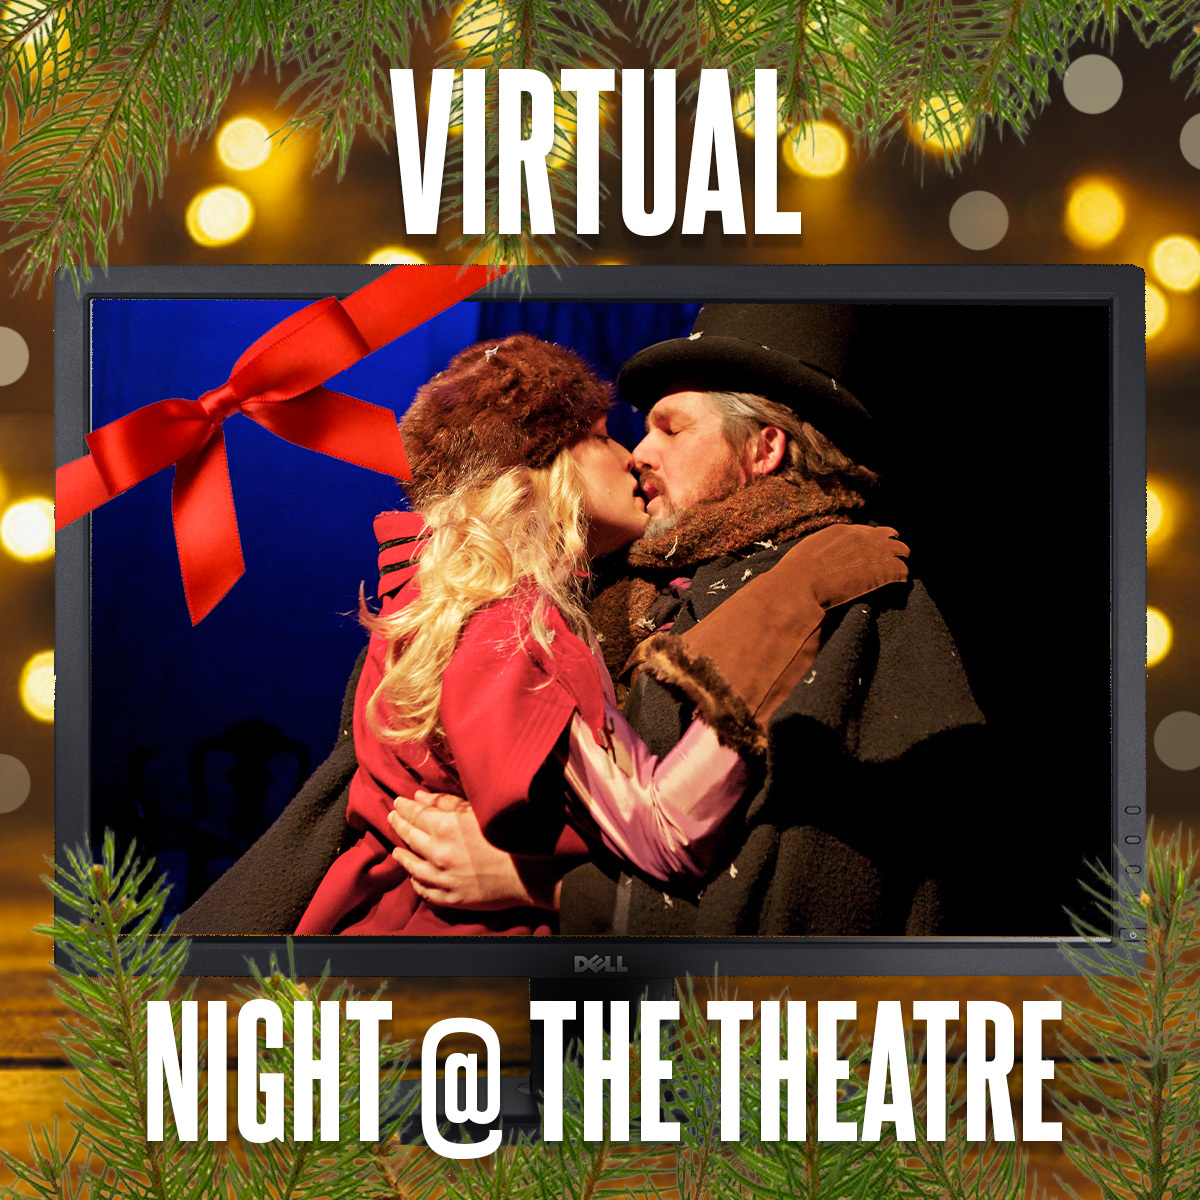 Virtual Night at the Theater